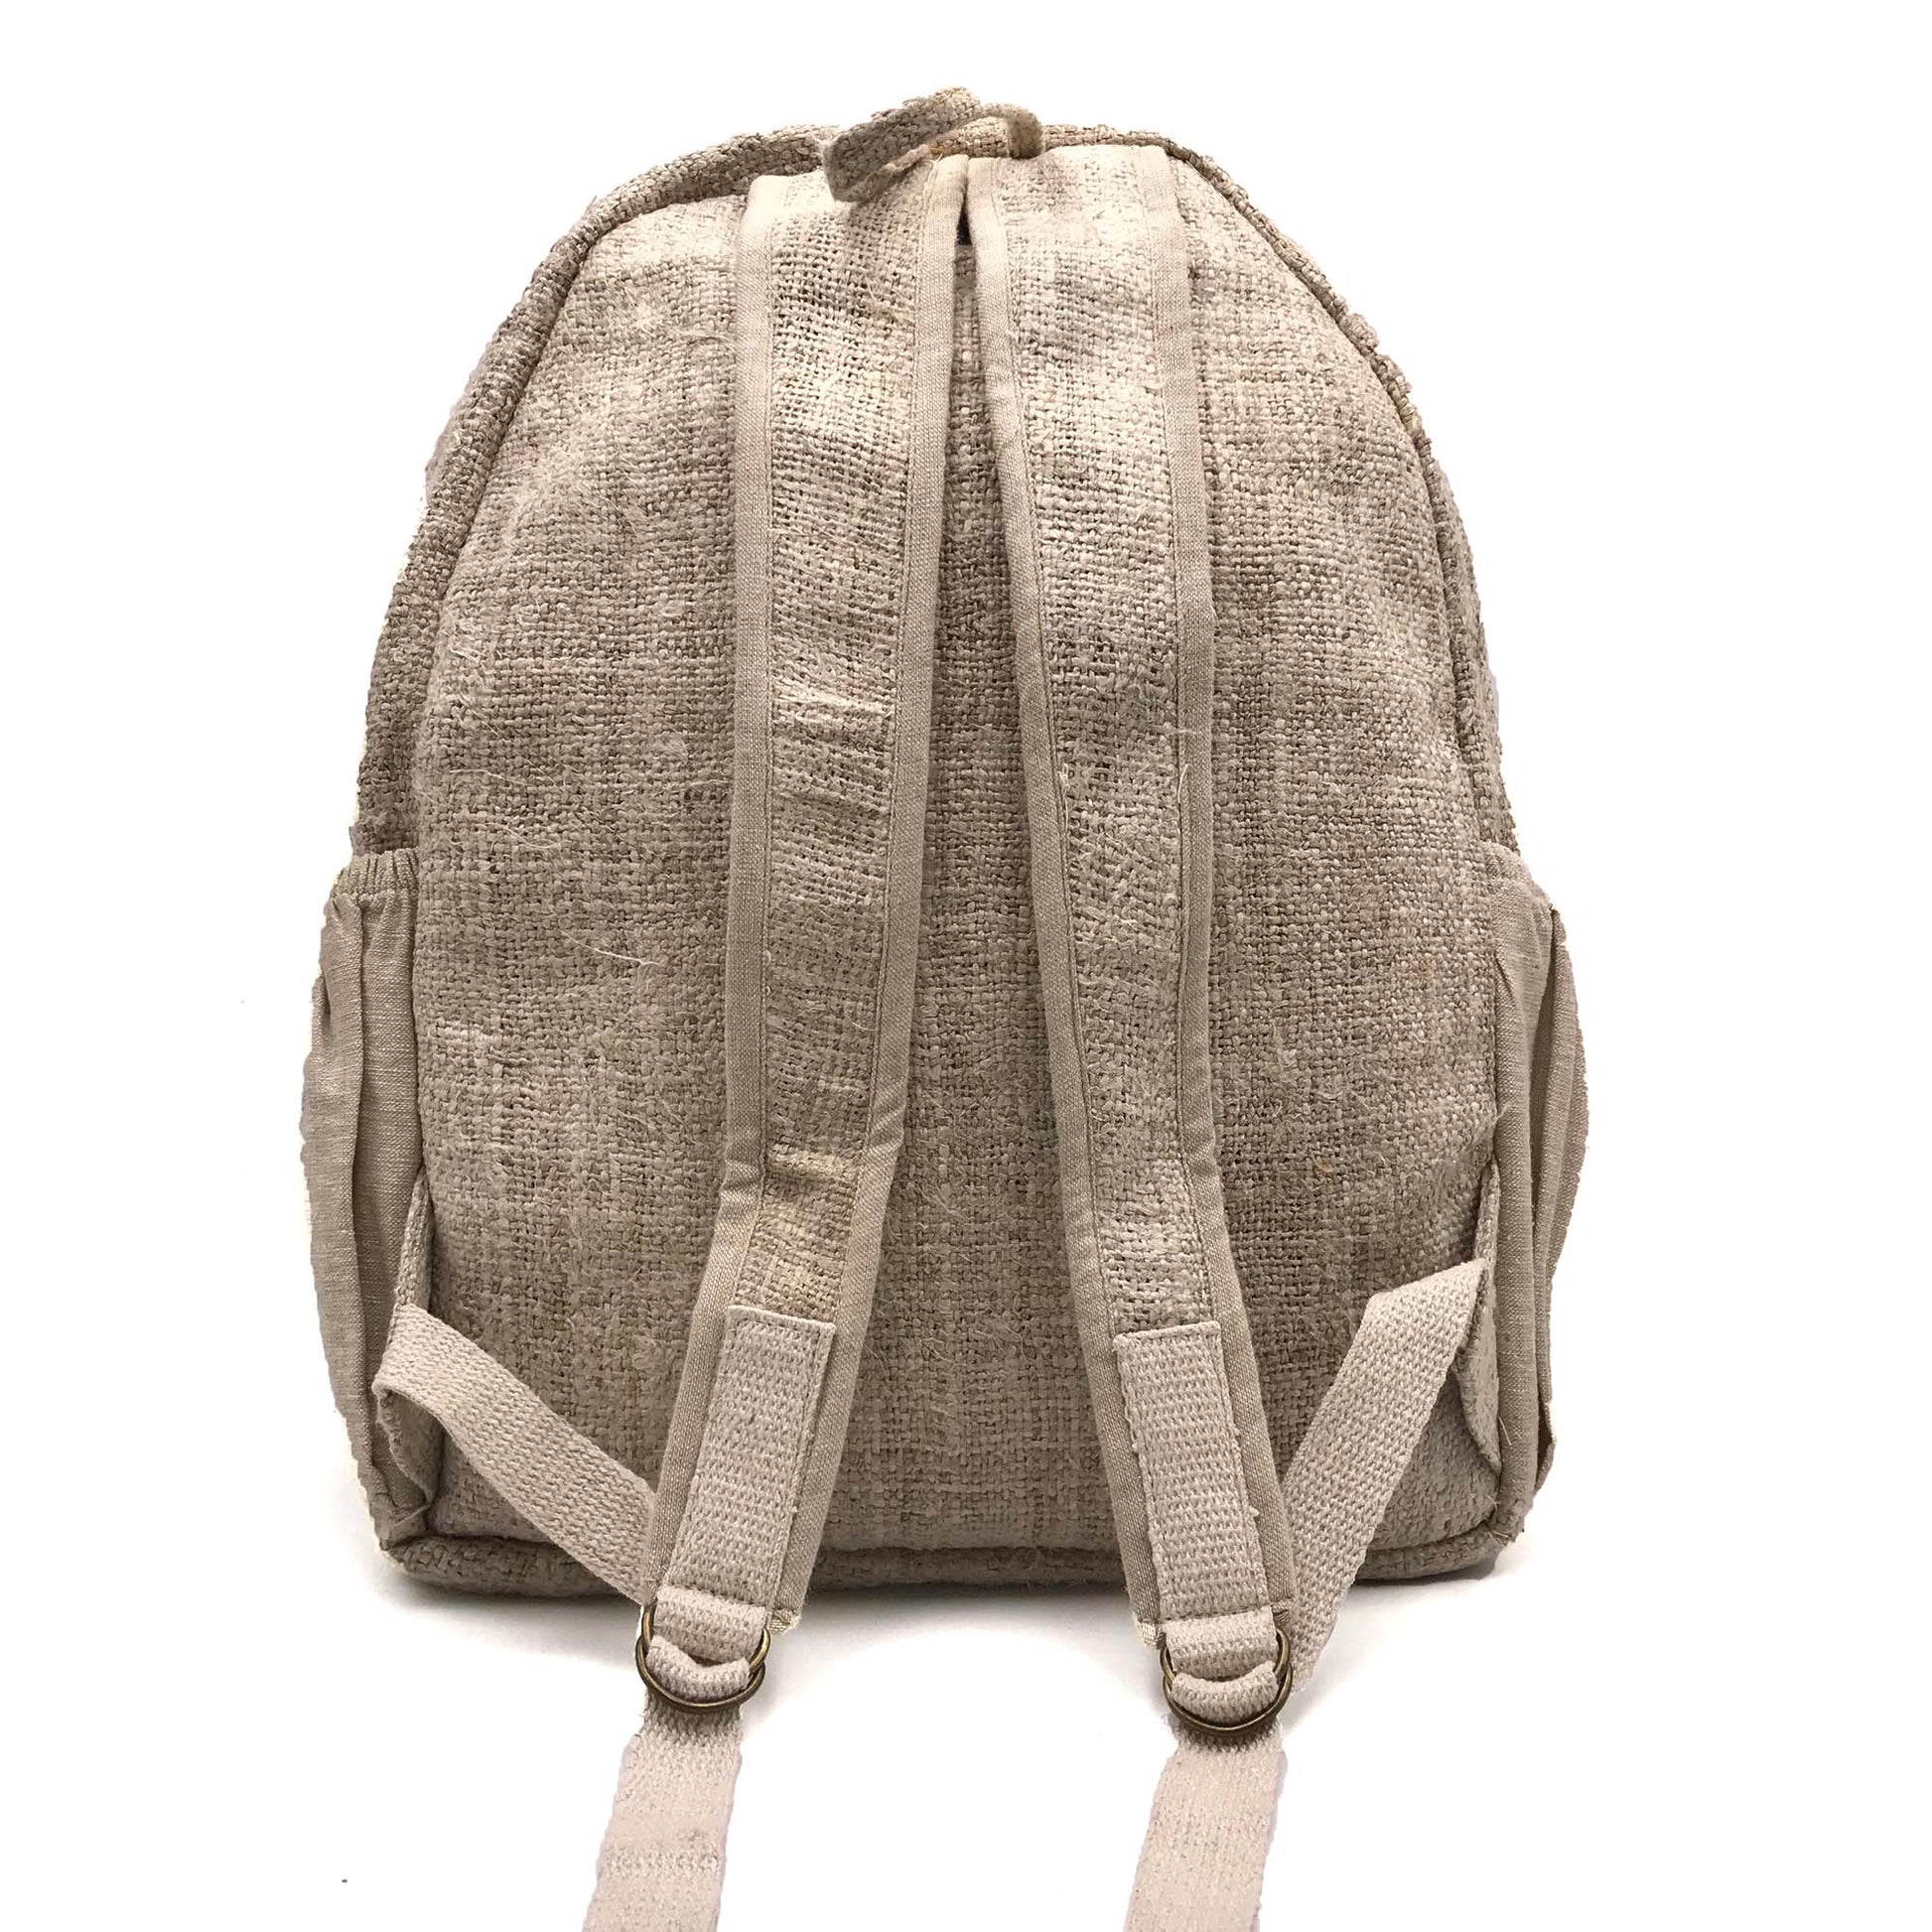 Hemp Bags, pouches and wallets made from 100% pure and natural hand-woven HEMP